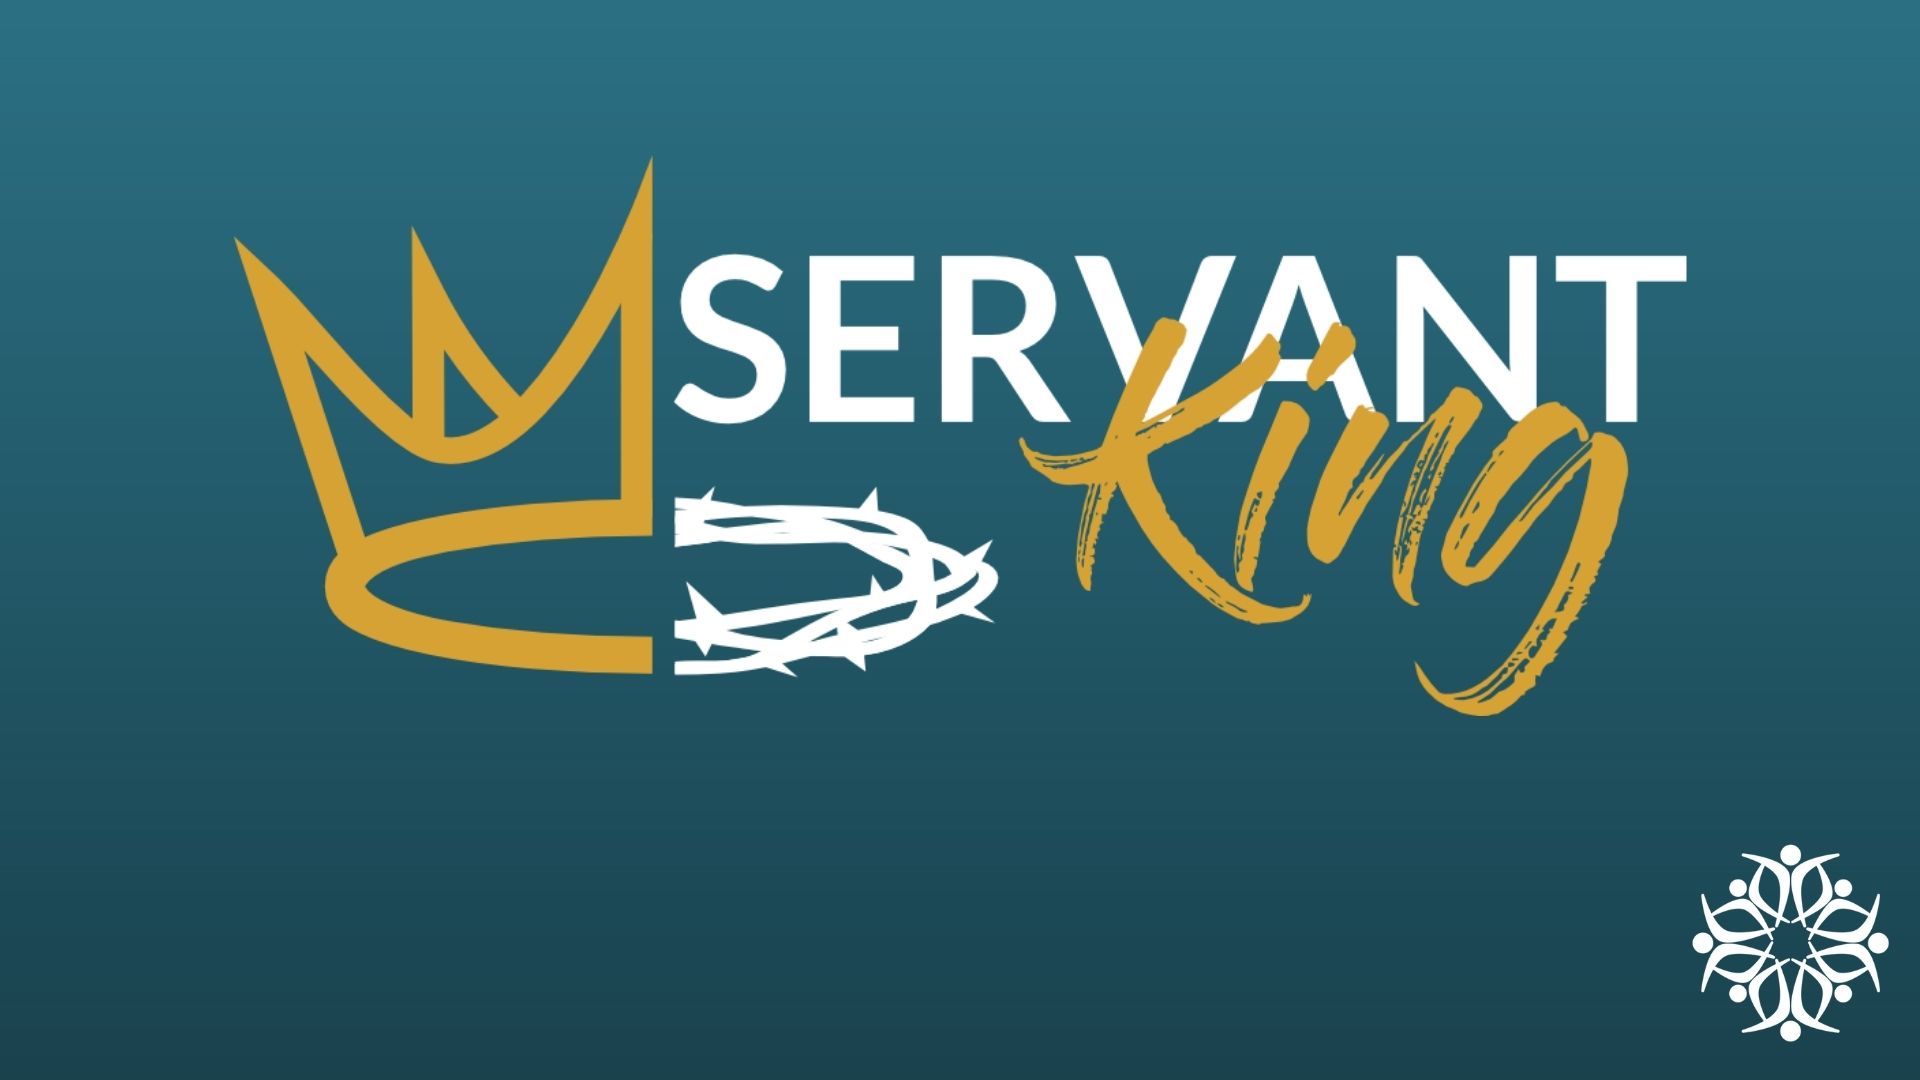 The Servant King’s Big Mission will Advance Through a Small Church!